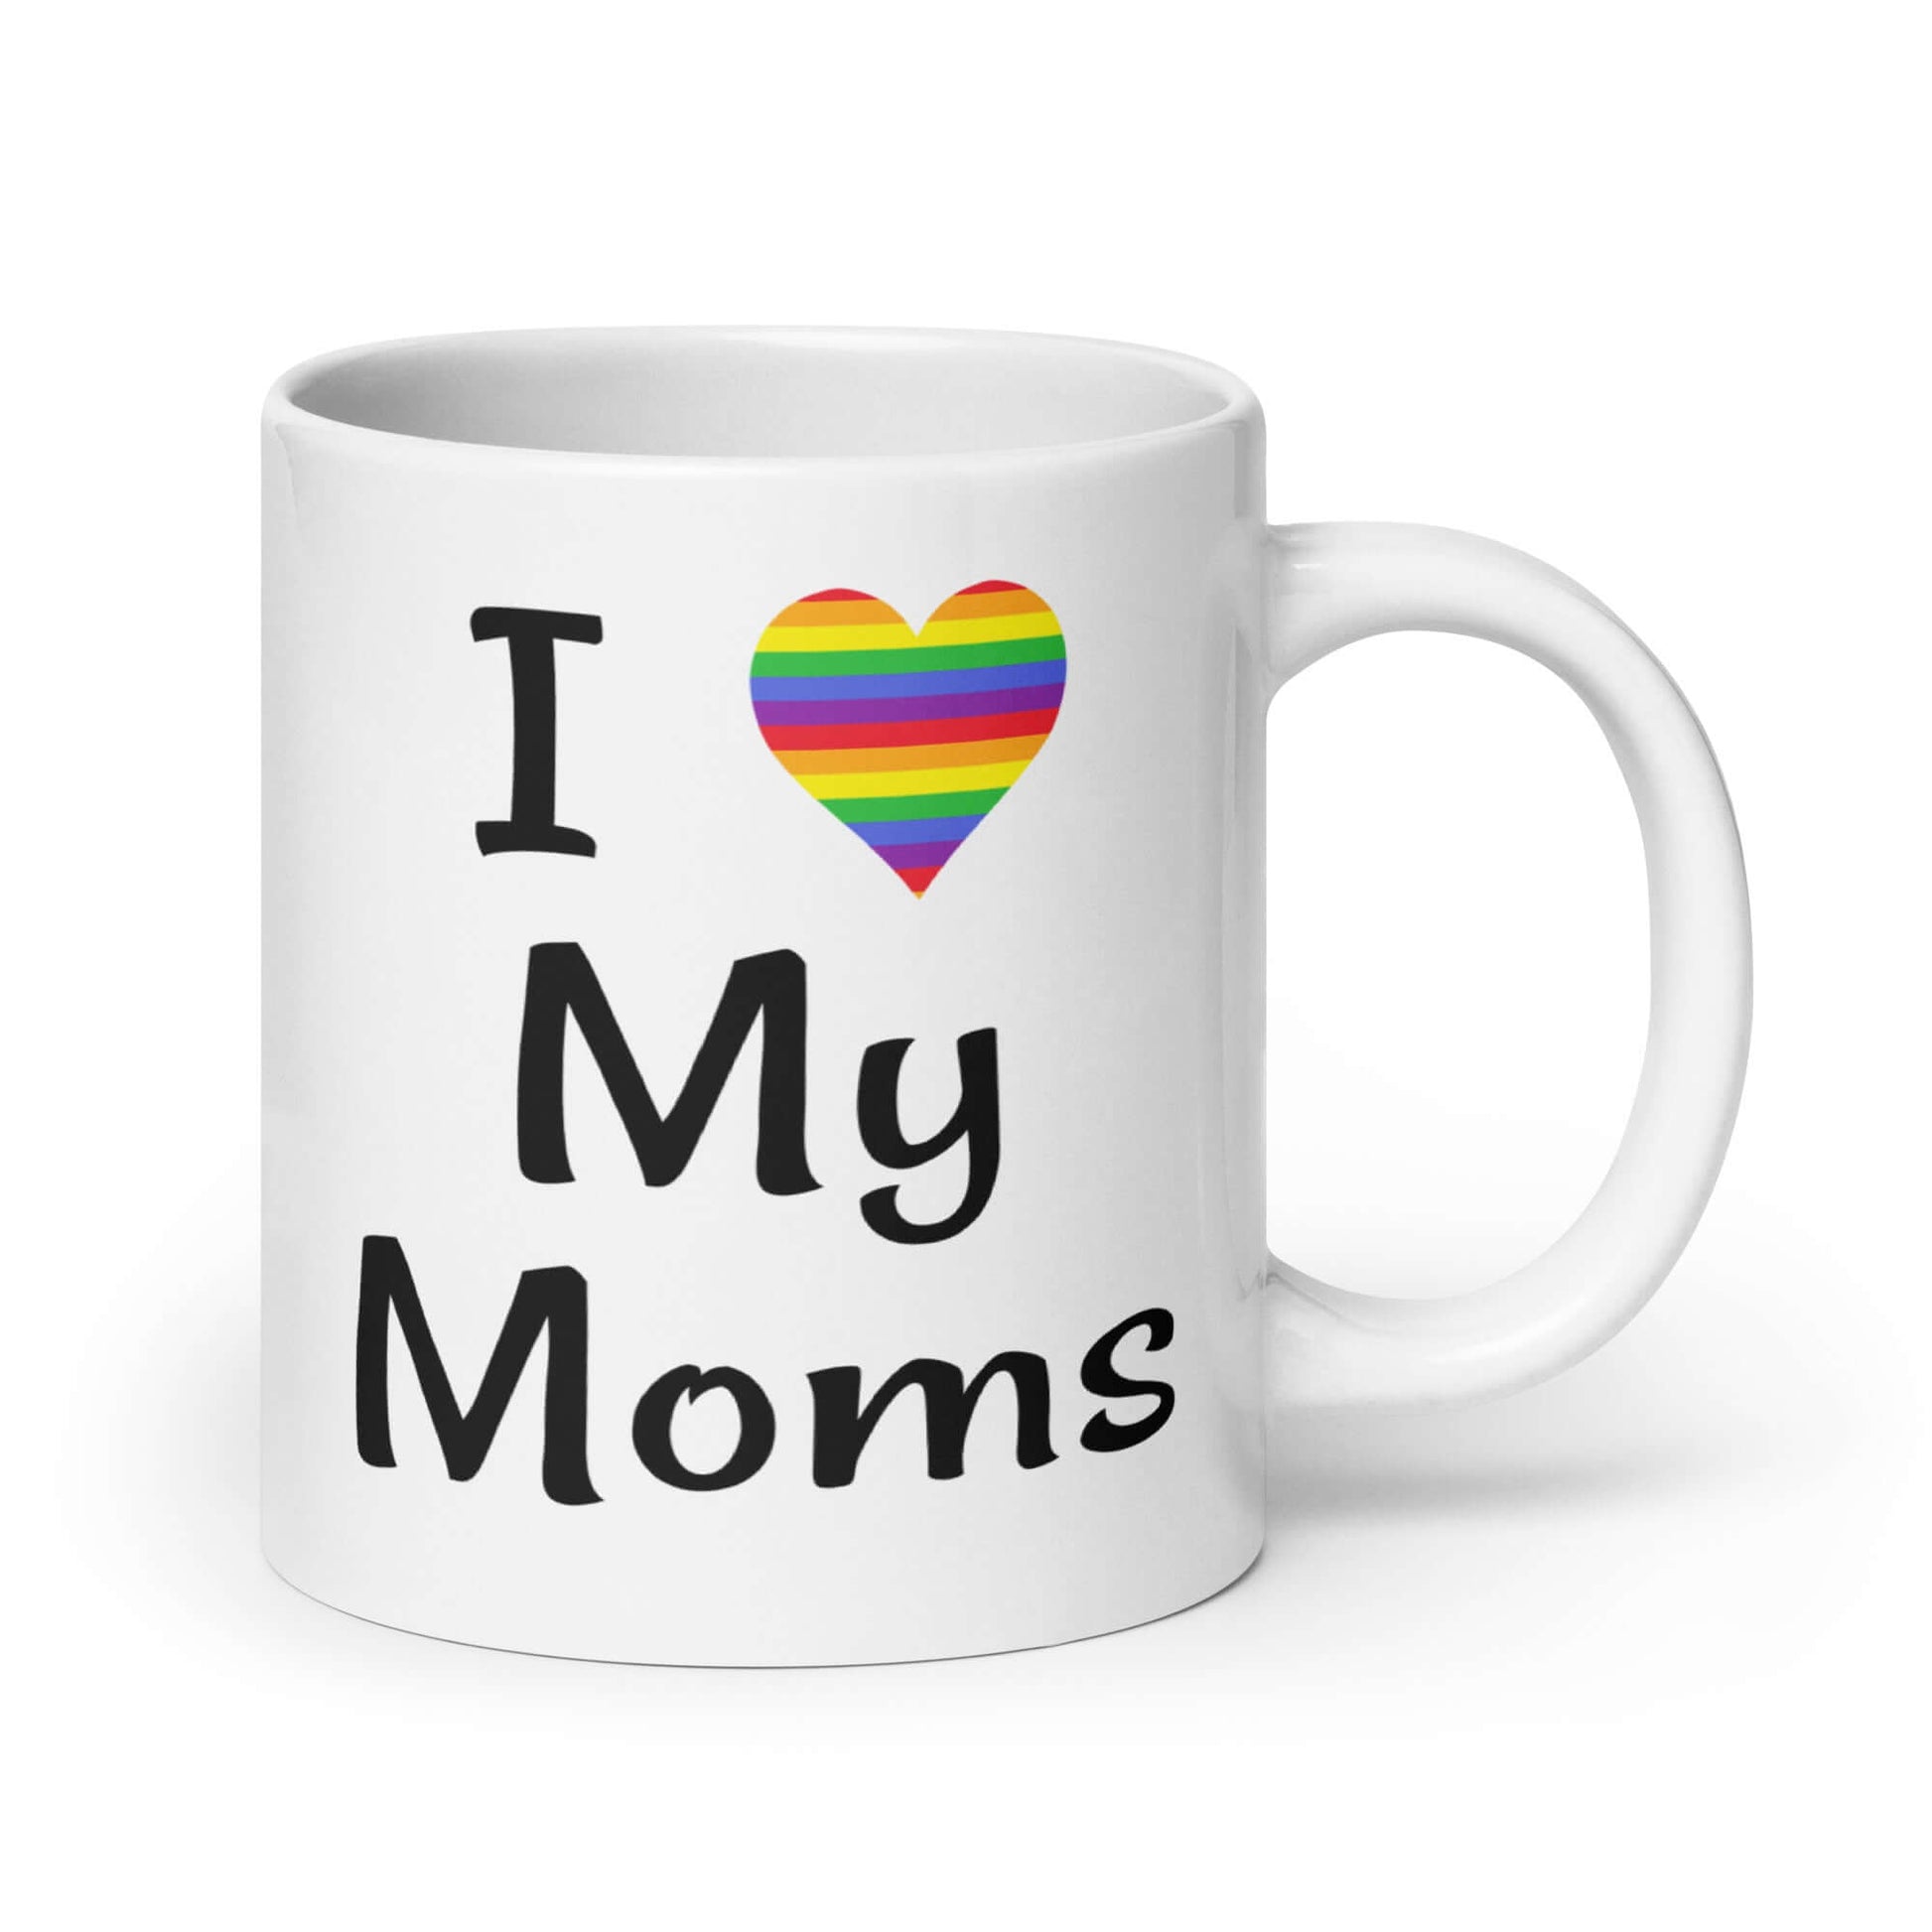 White ceramic coffee mug with the phrase I heart my Moms printed on both sides of the mug. The heart is rainbow.